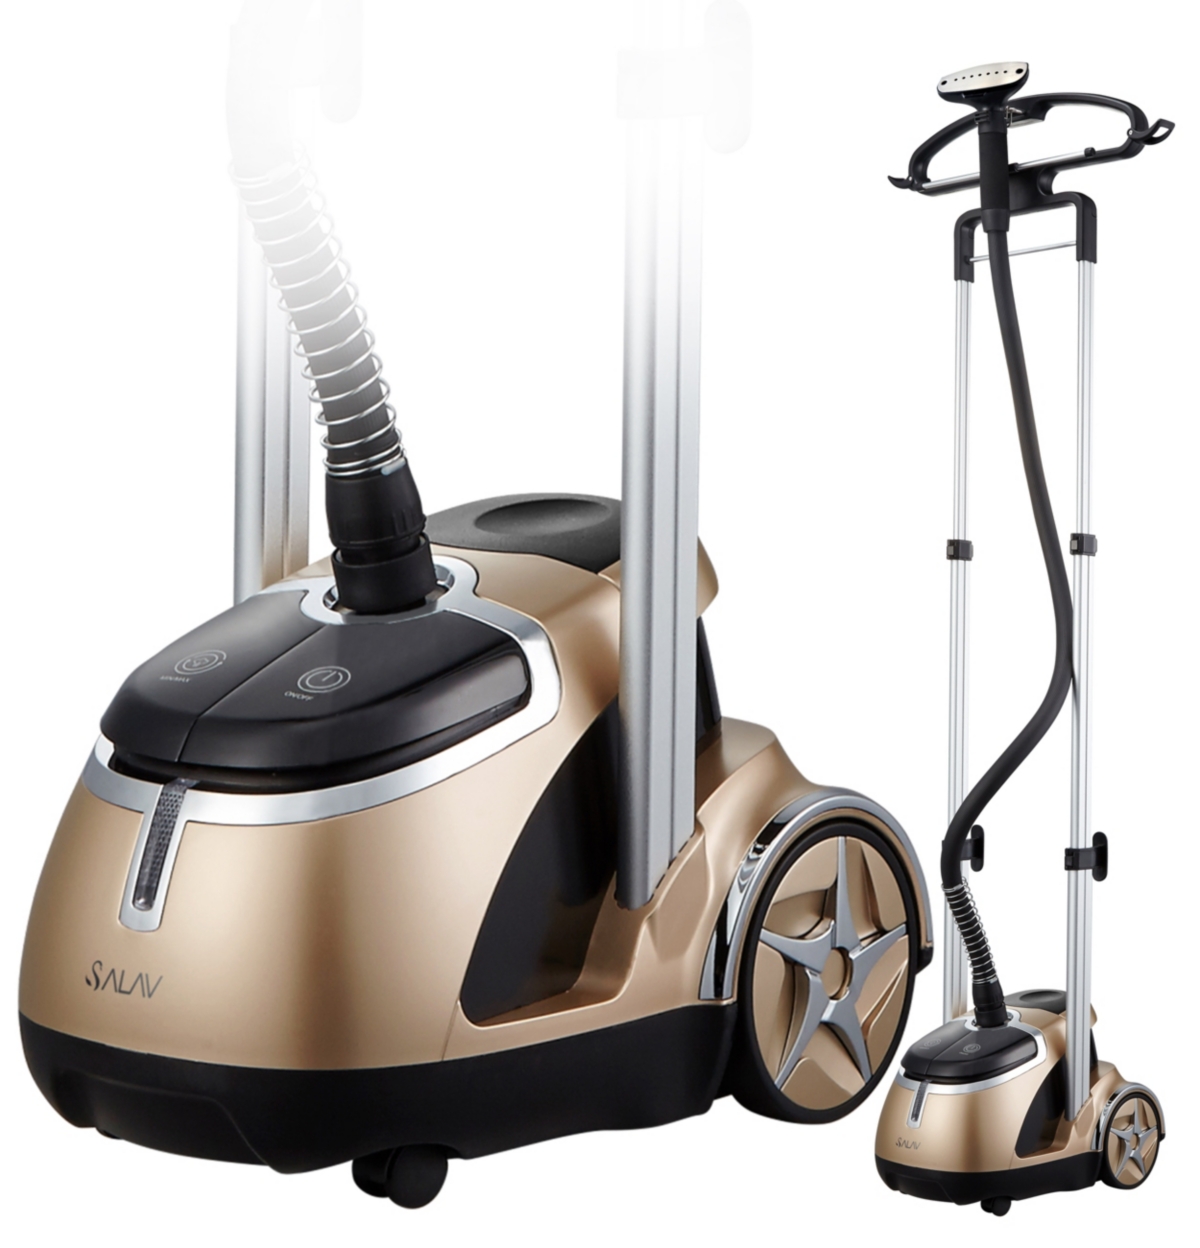 Professional Garment Steamer with Retractable Power Cord and Foot Pedal Control, GS49-dj - Gold